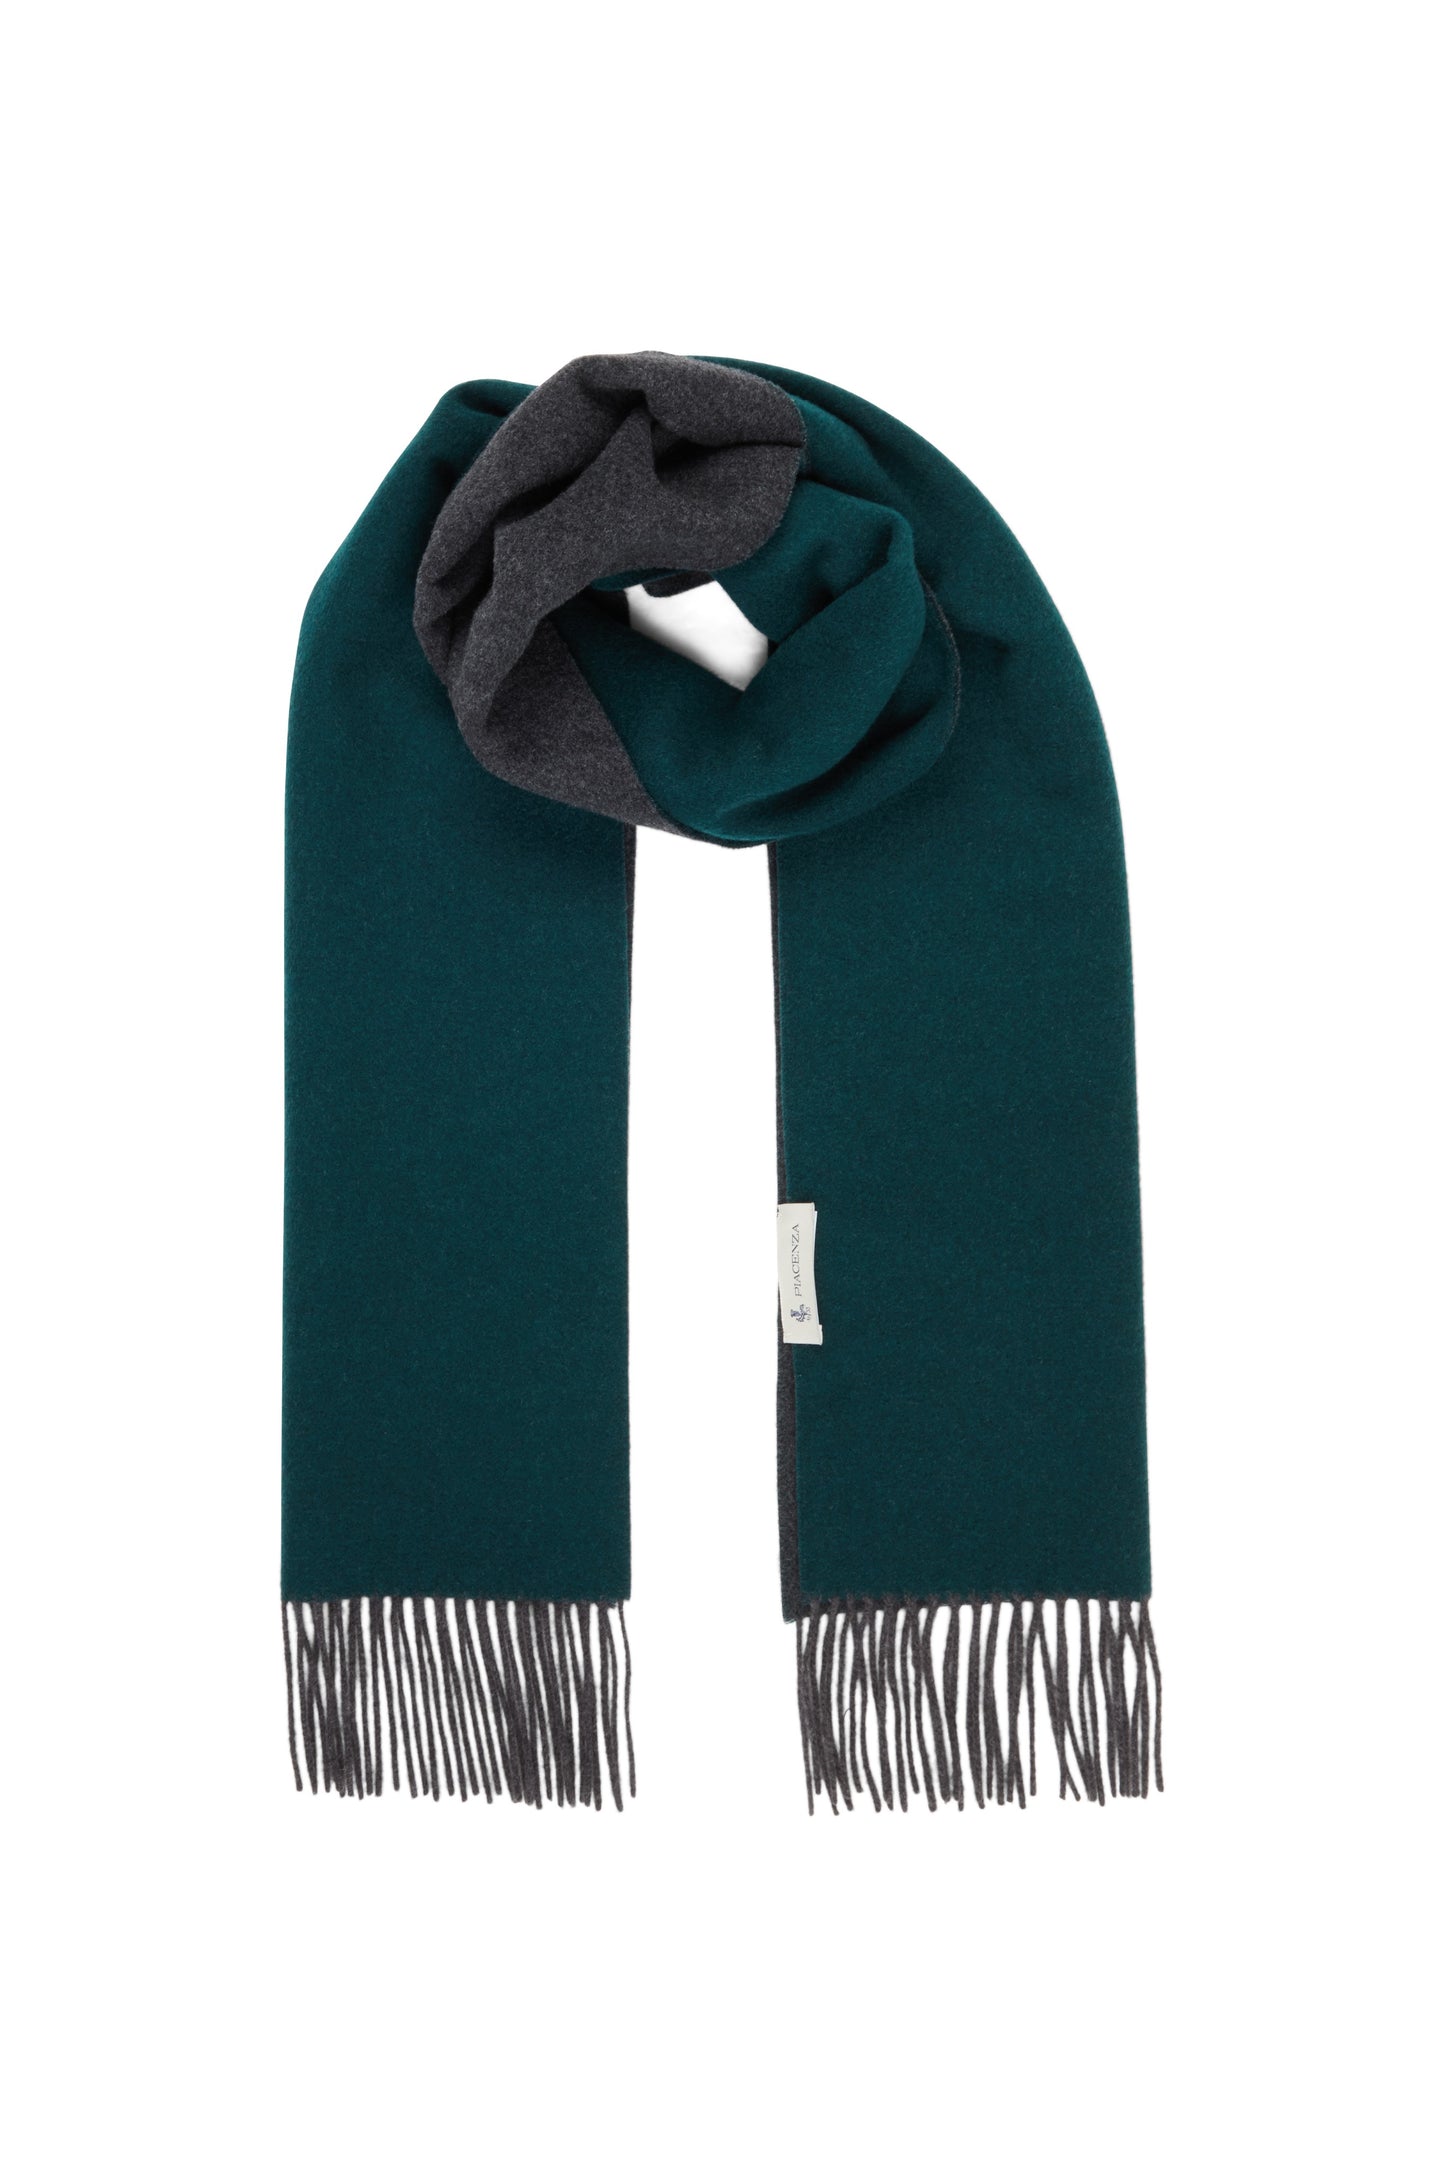 Green and gray Eternity scarf in pure Alashan Cashmere